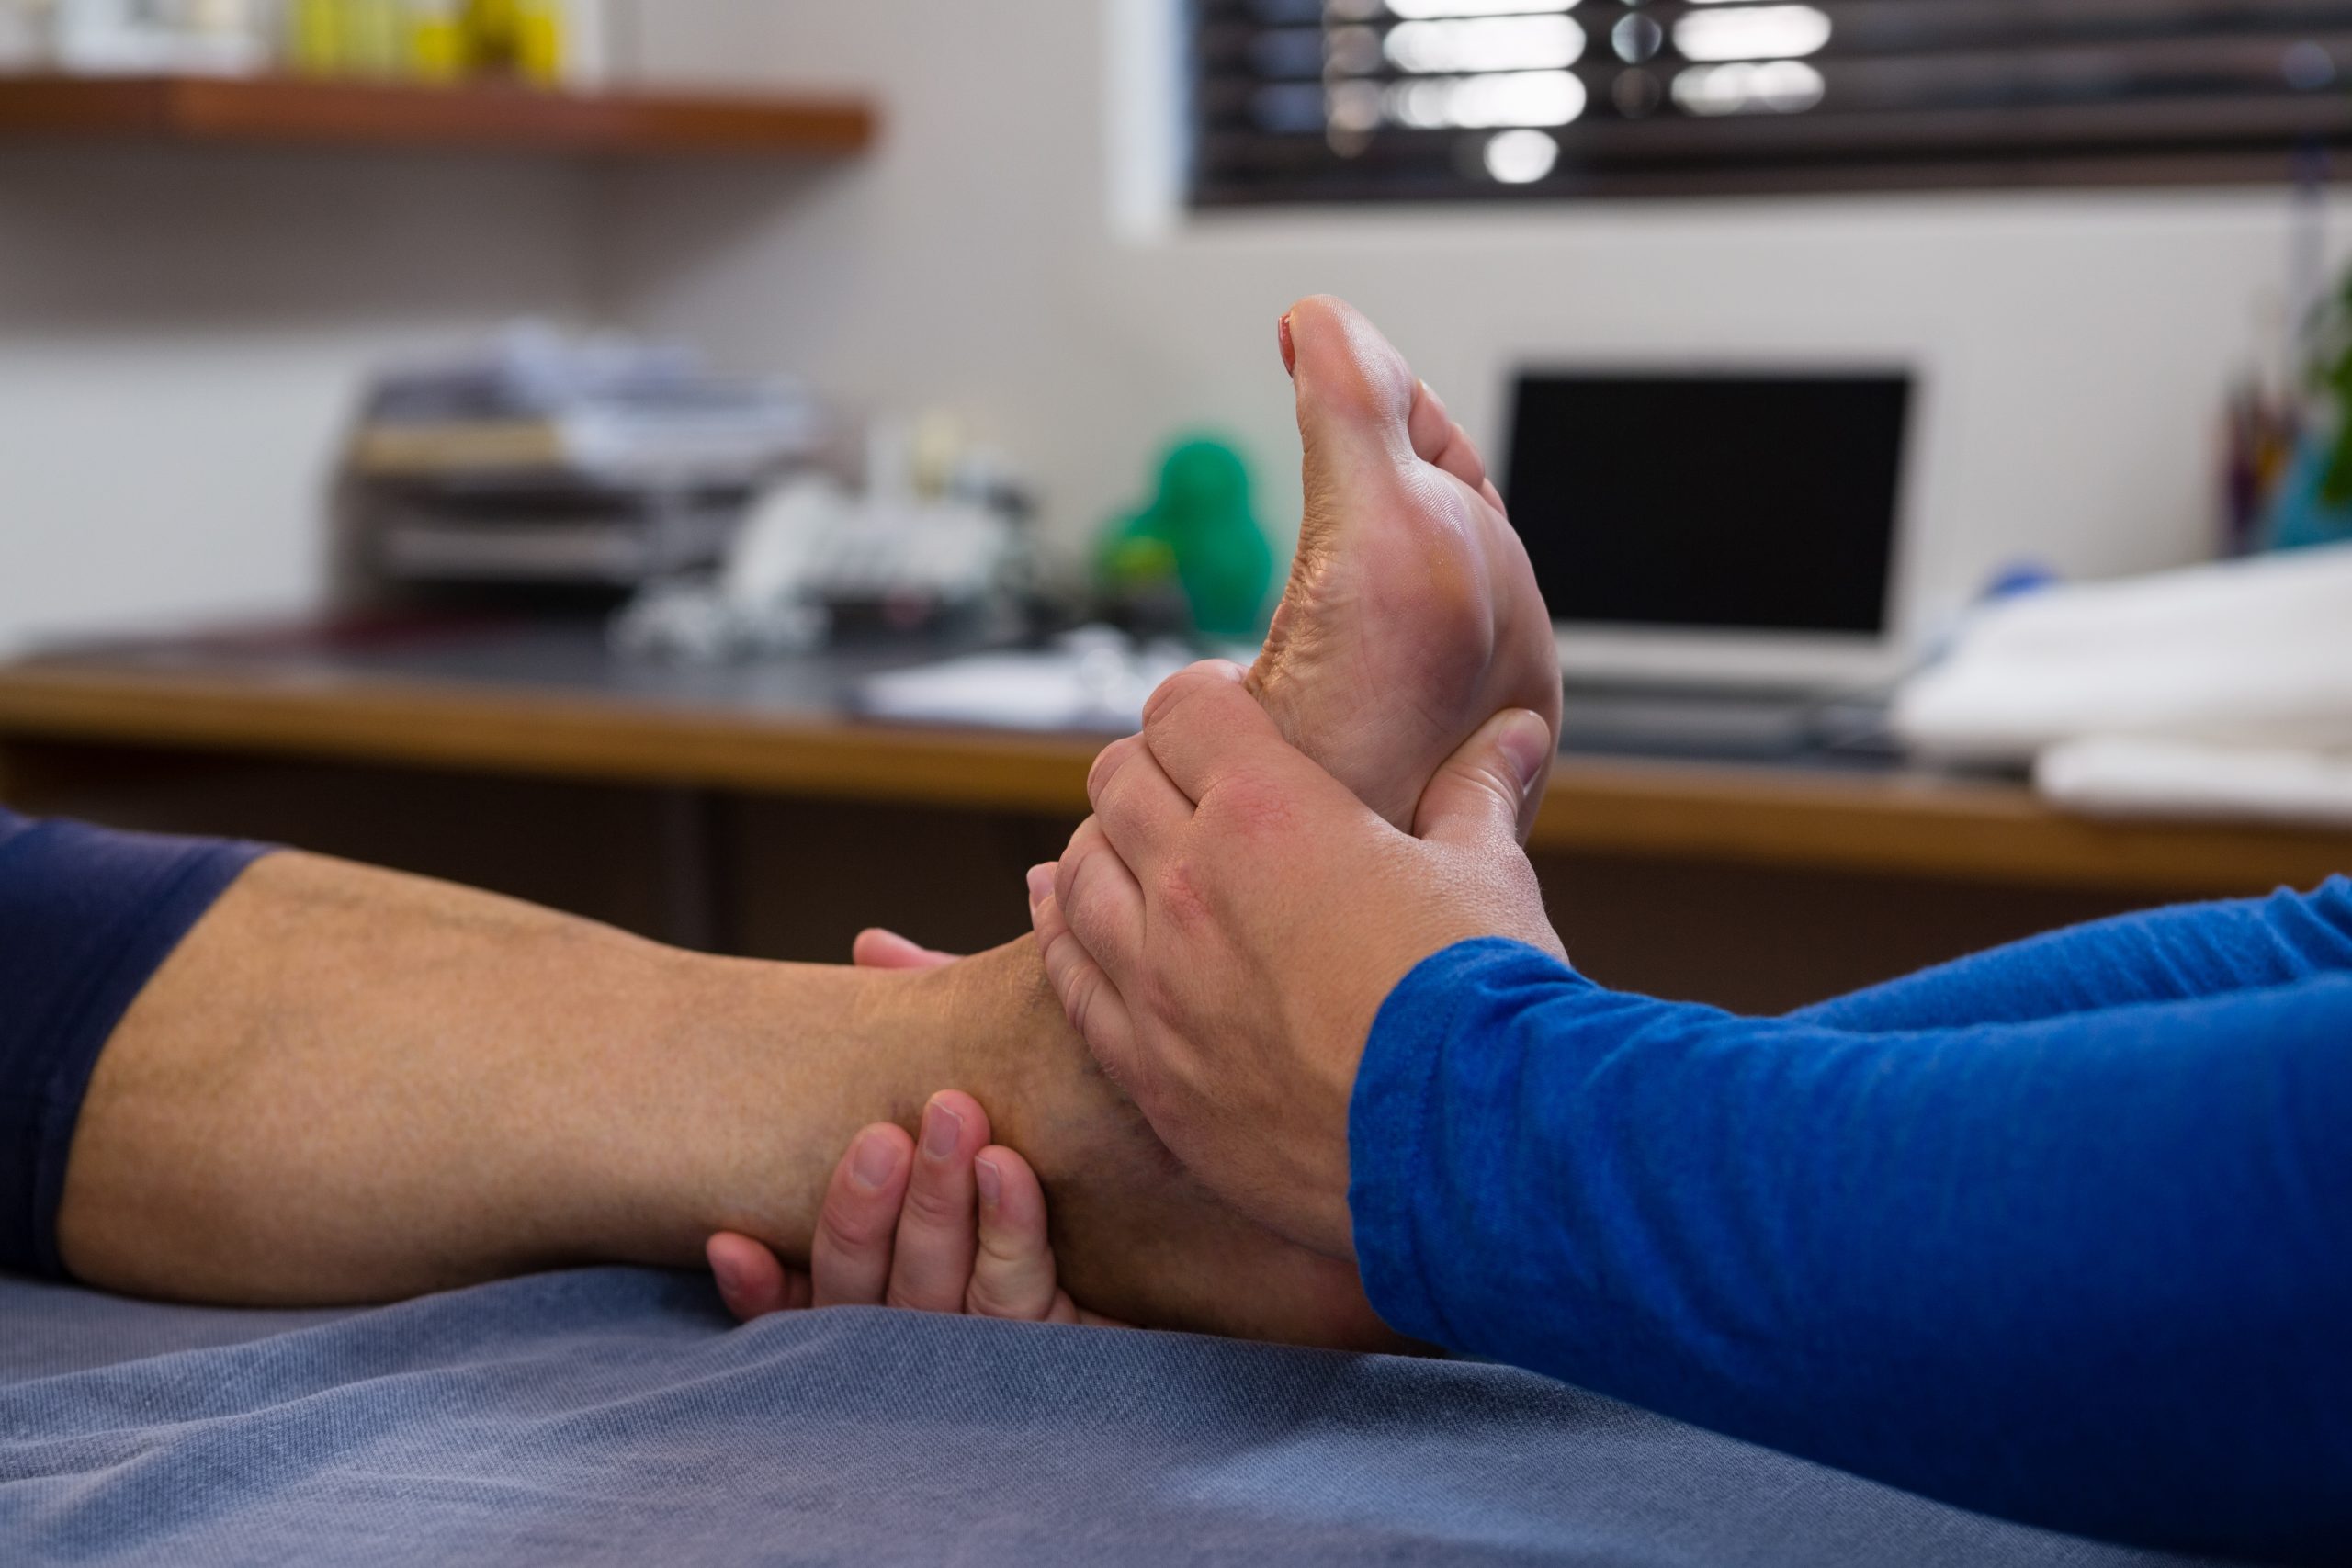 Did You Sprain Your Ankle? Here’s Why It Can be Serious and What to